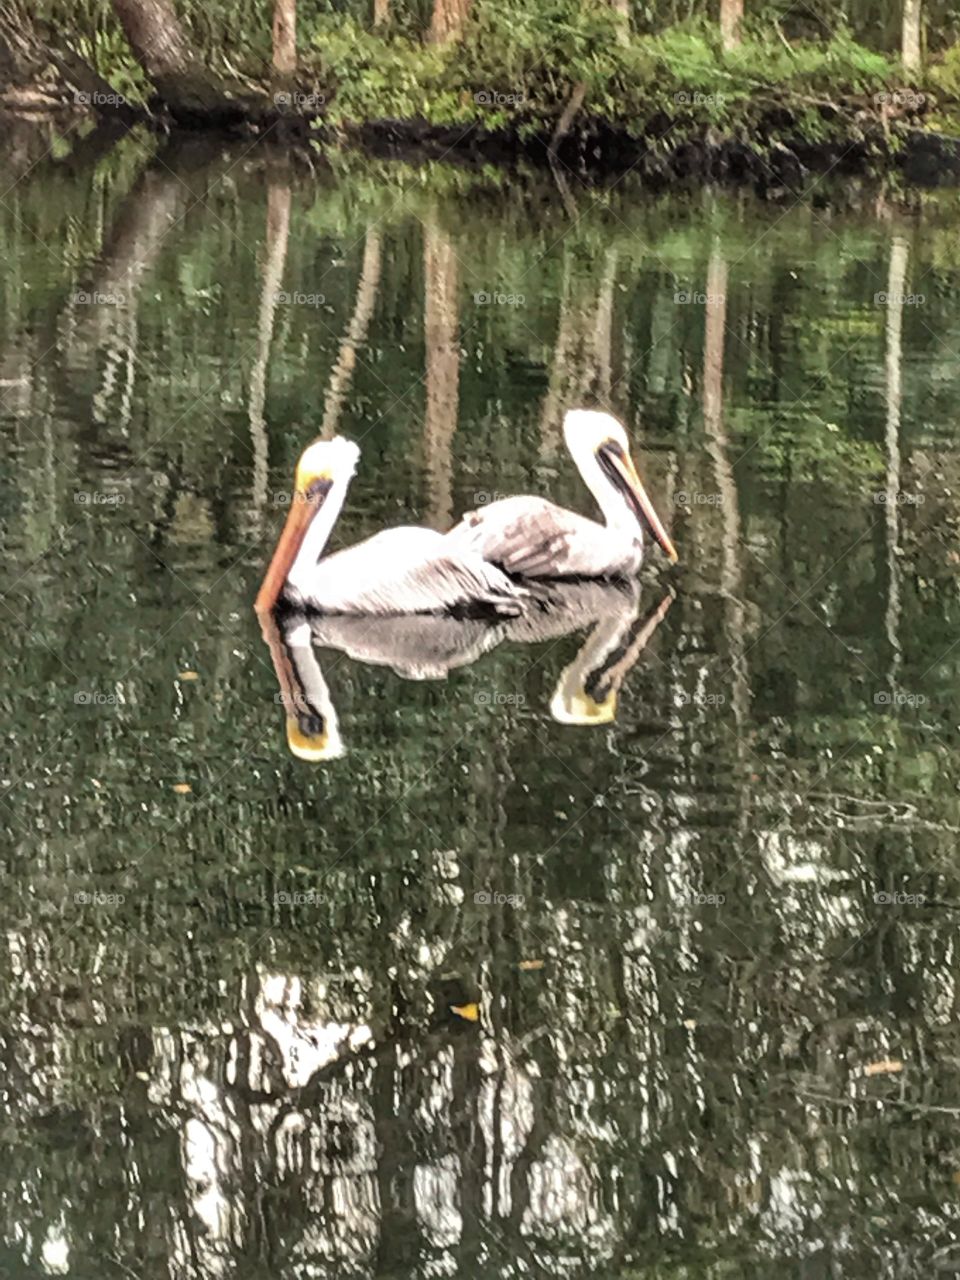 Poising Pelicans and their reflections in the Chaz River 